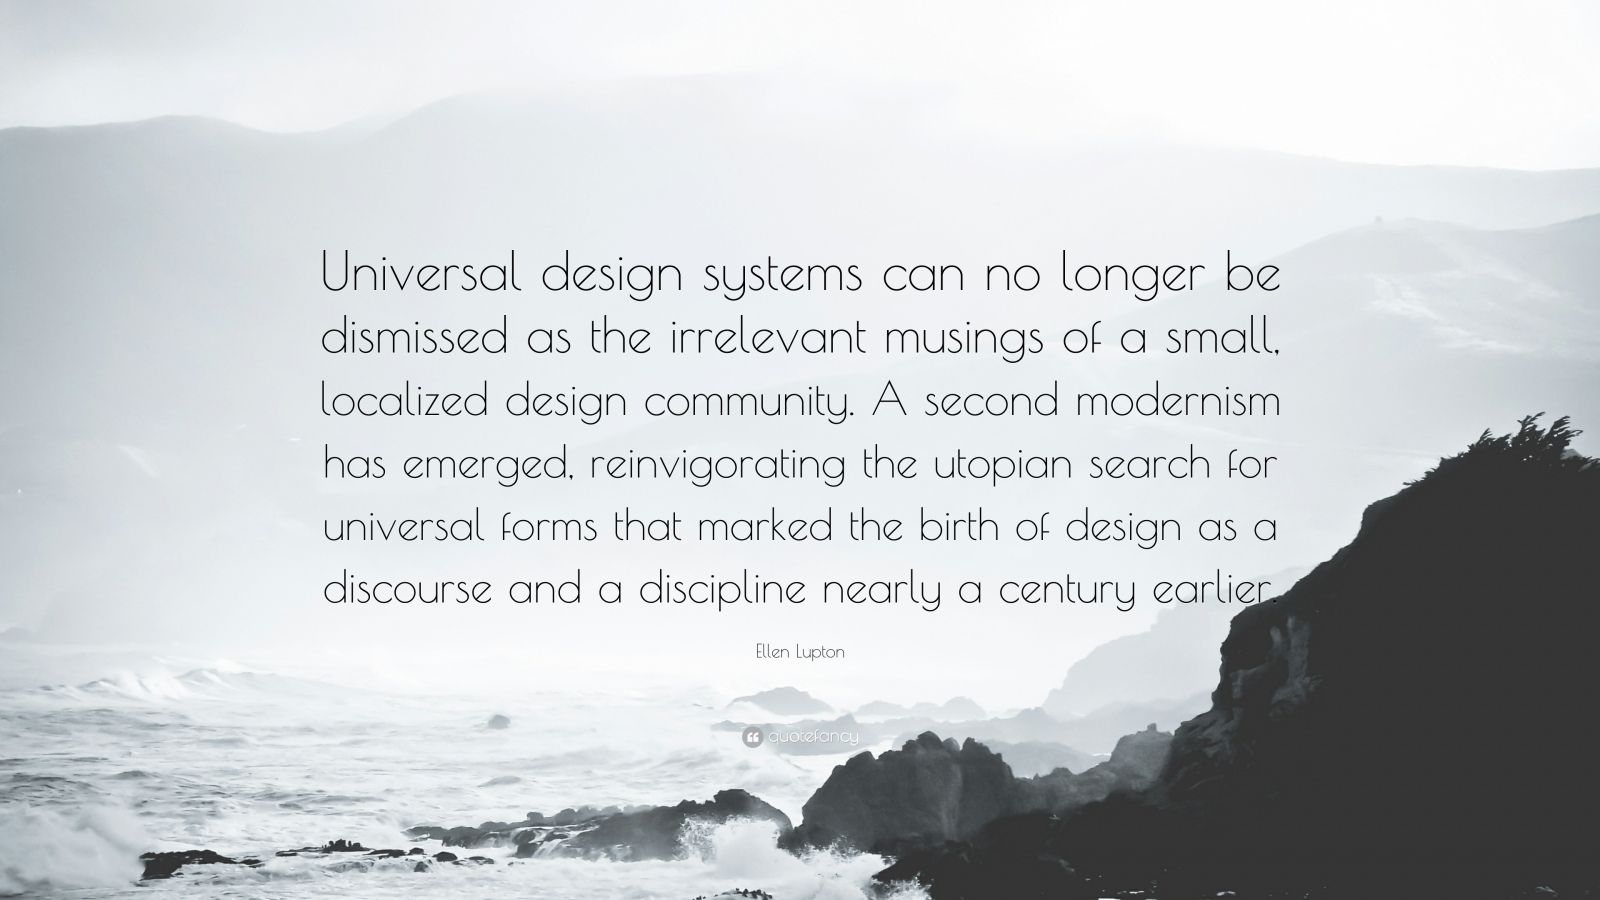 Ellen Lupton Quote: “Universal design systems can no longer be